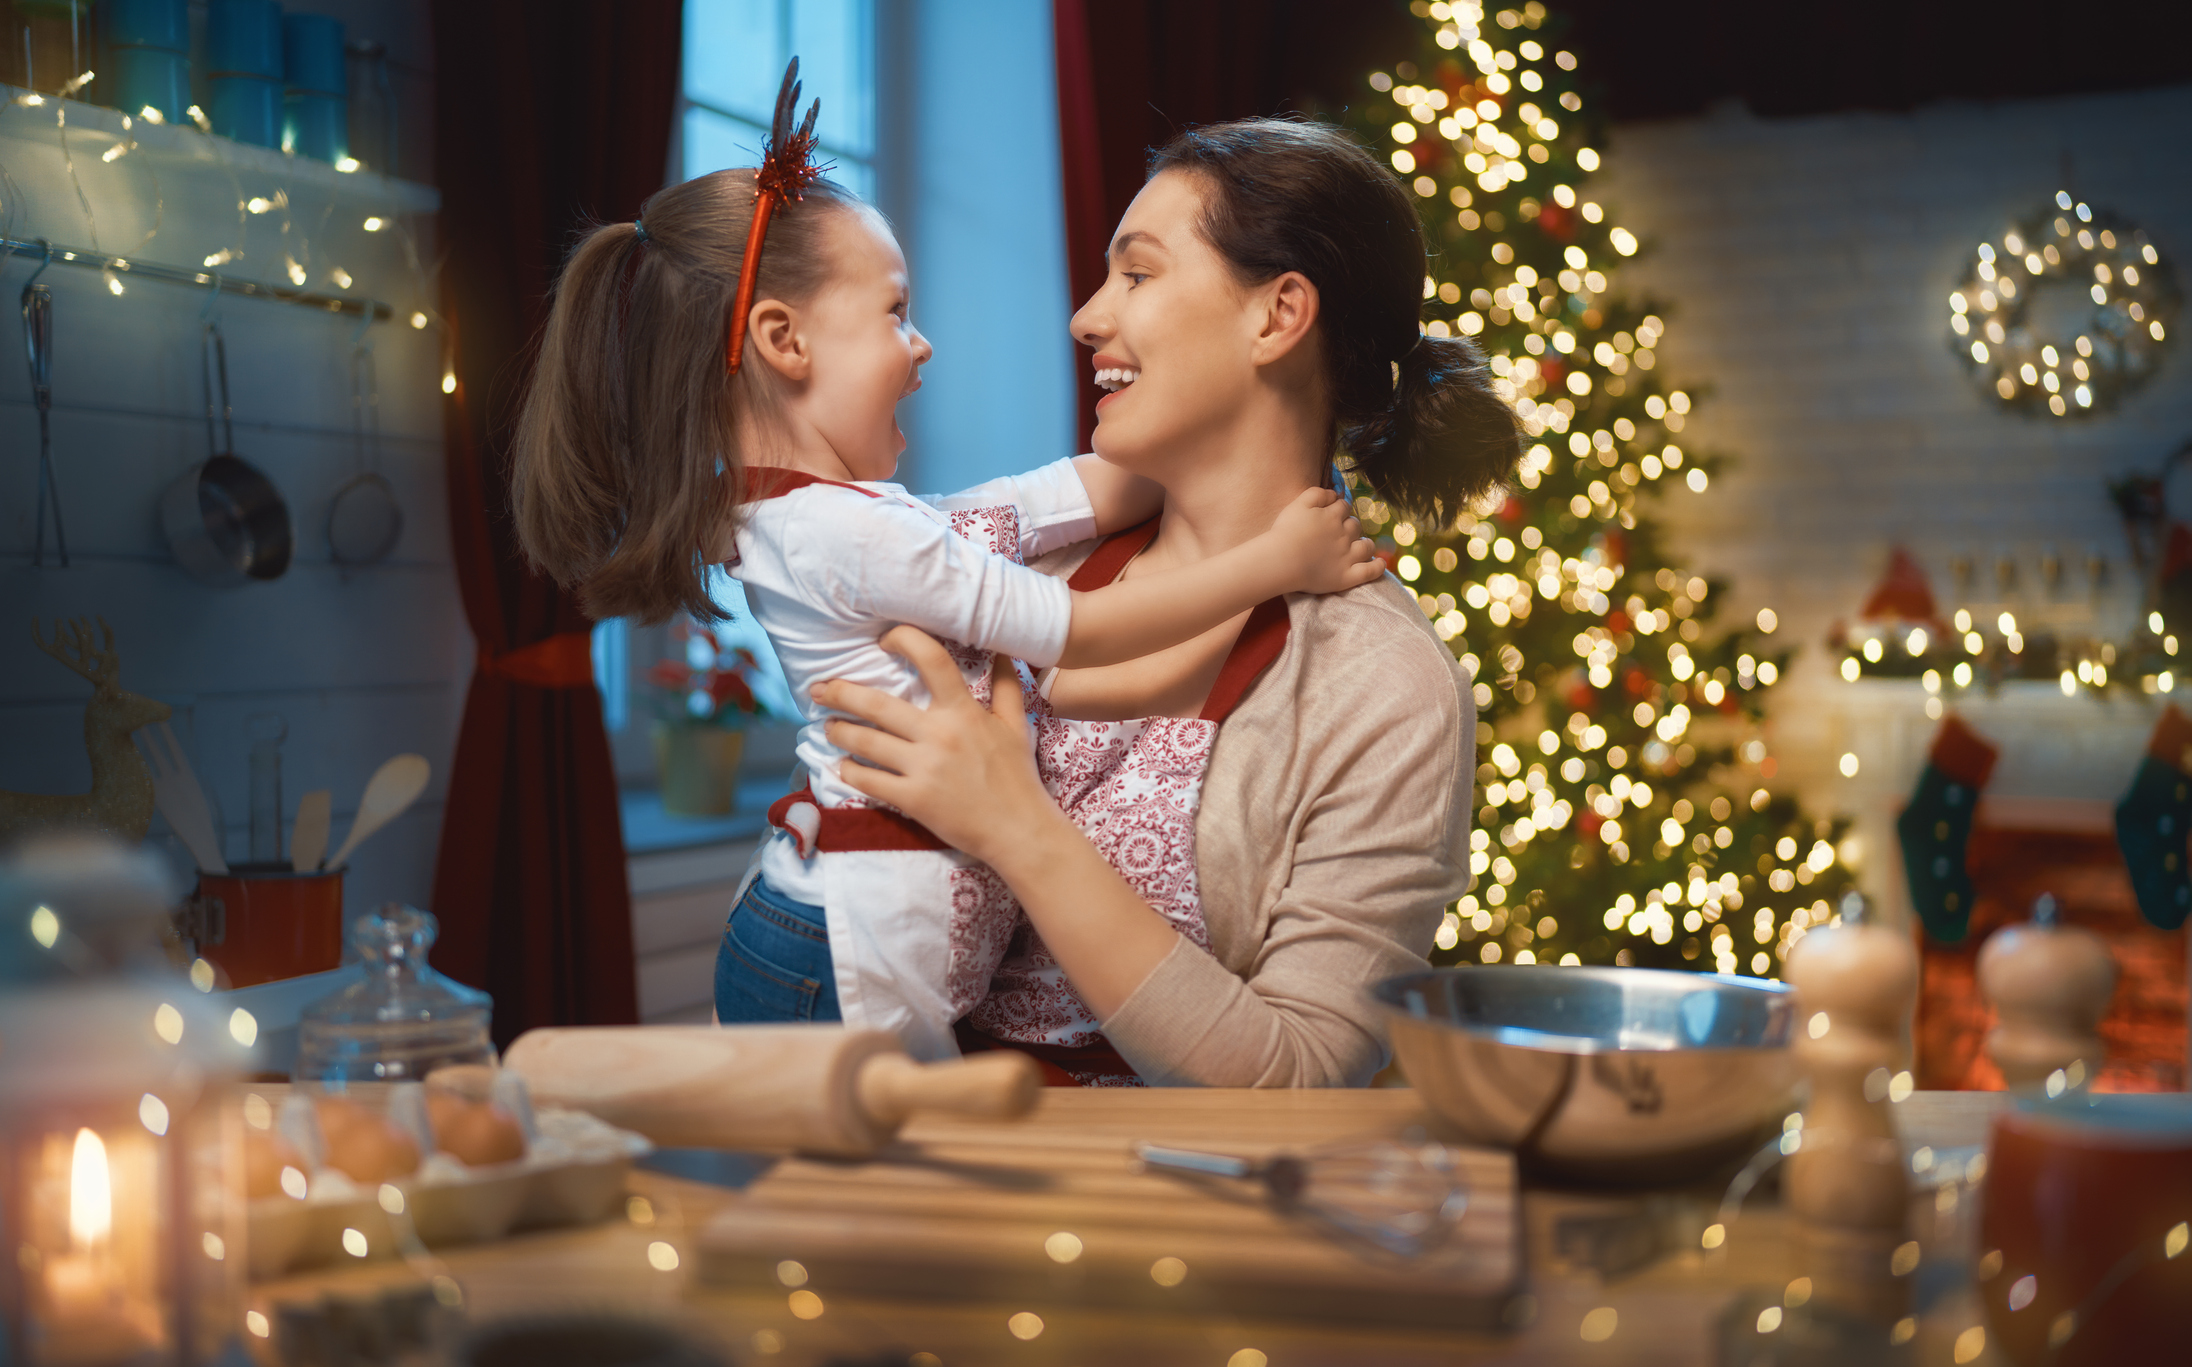 Merry Christmas and Happy Holidays. Family preparation holiday food. Mother and daughter cooking cookies. (Photo: iStock - Choreograph)